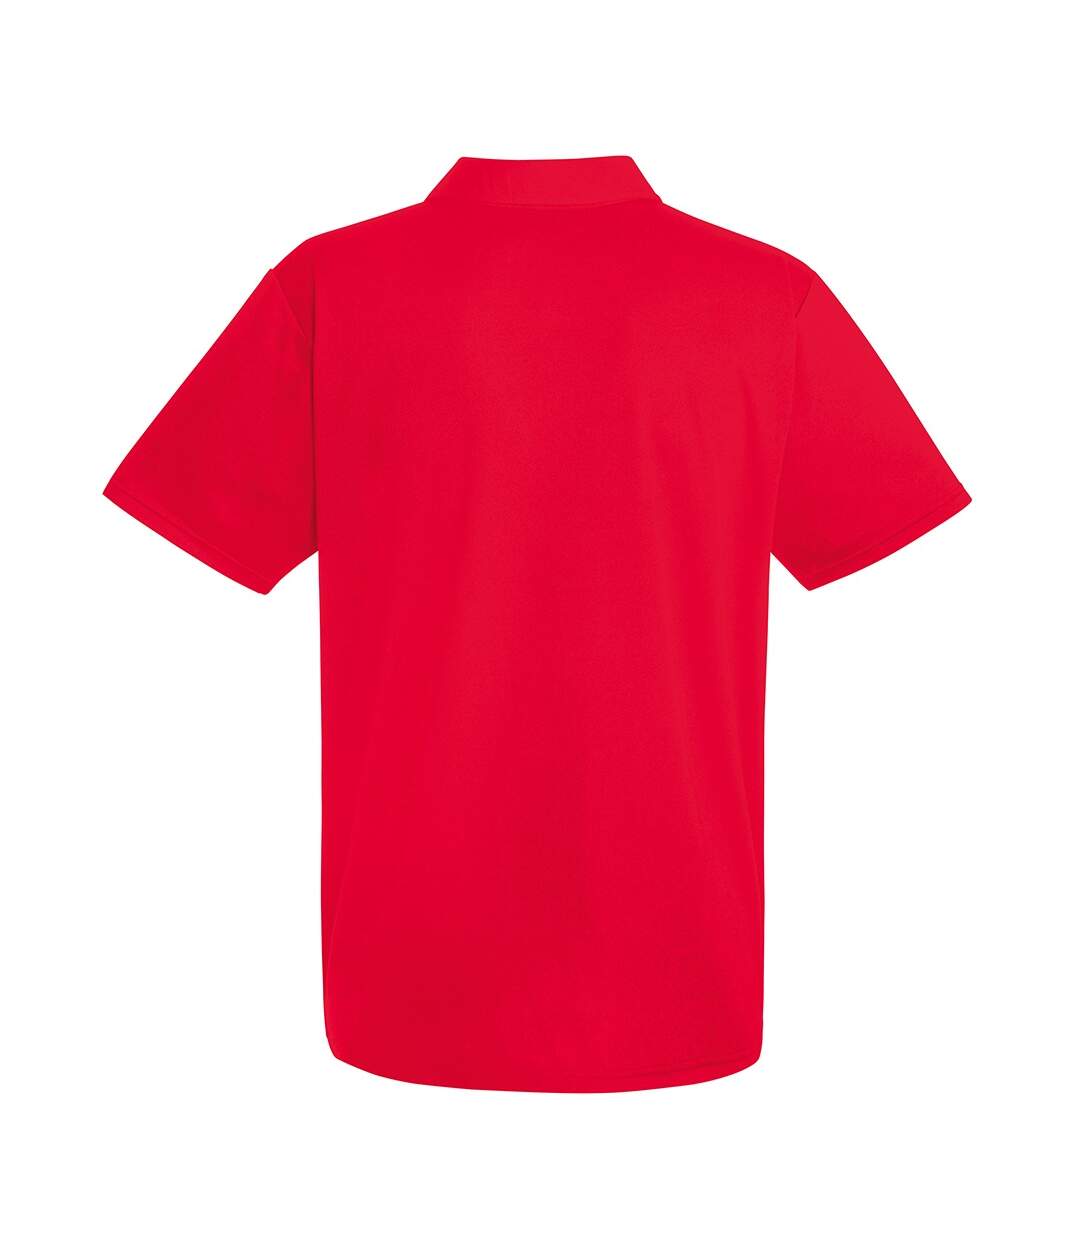 Fruit Of The Loom - Polo sport à manches courtes - Homme (Rouge) - UTBC3479